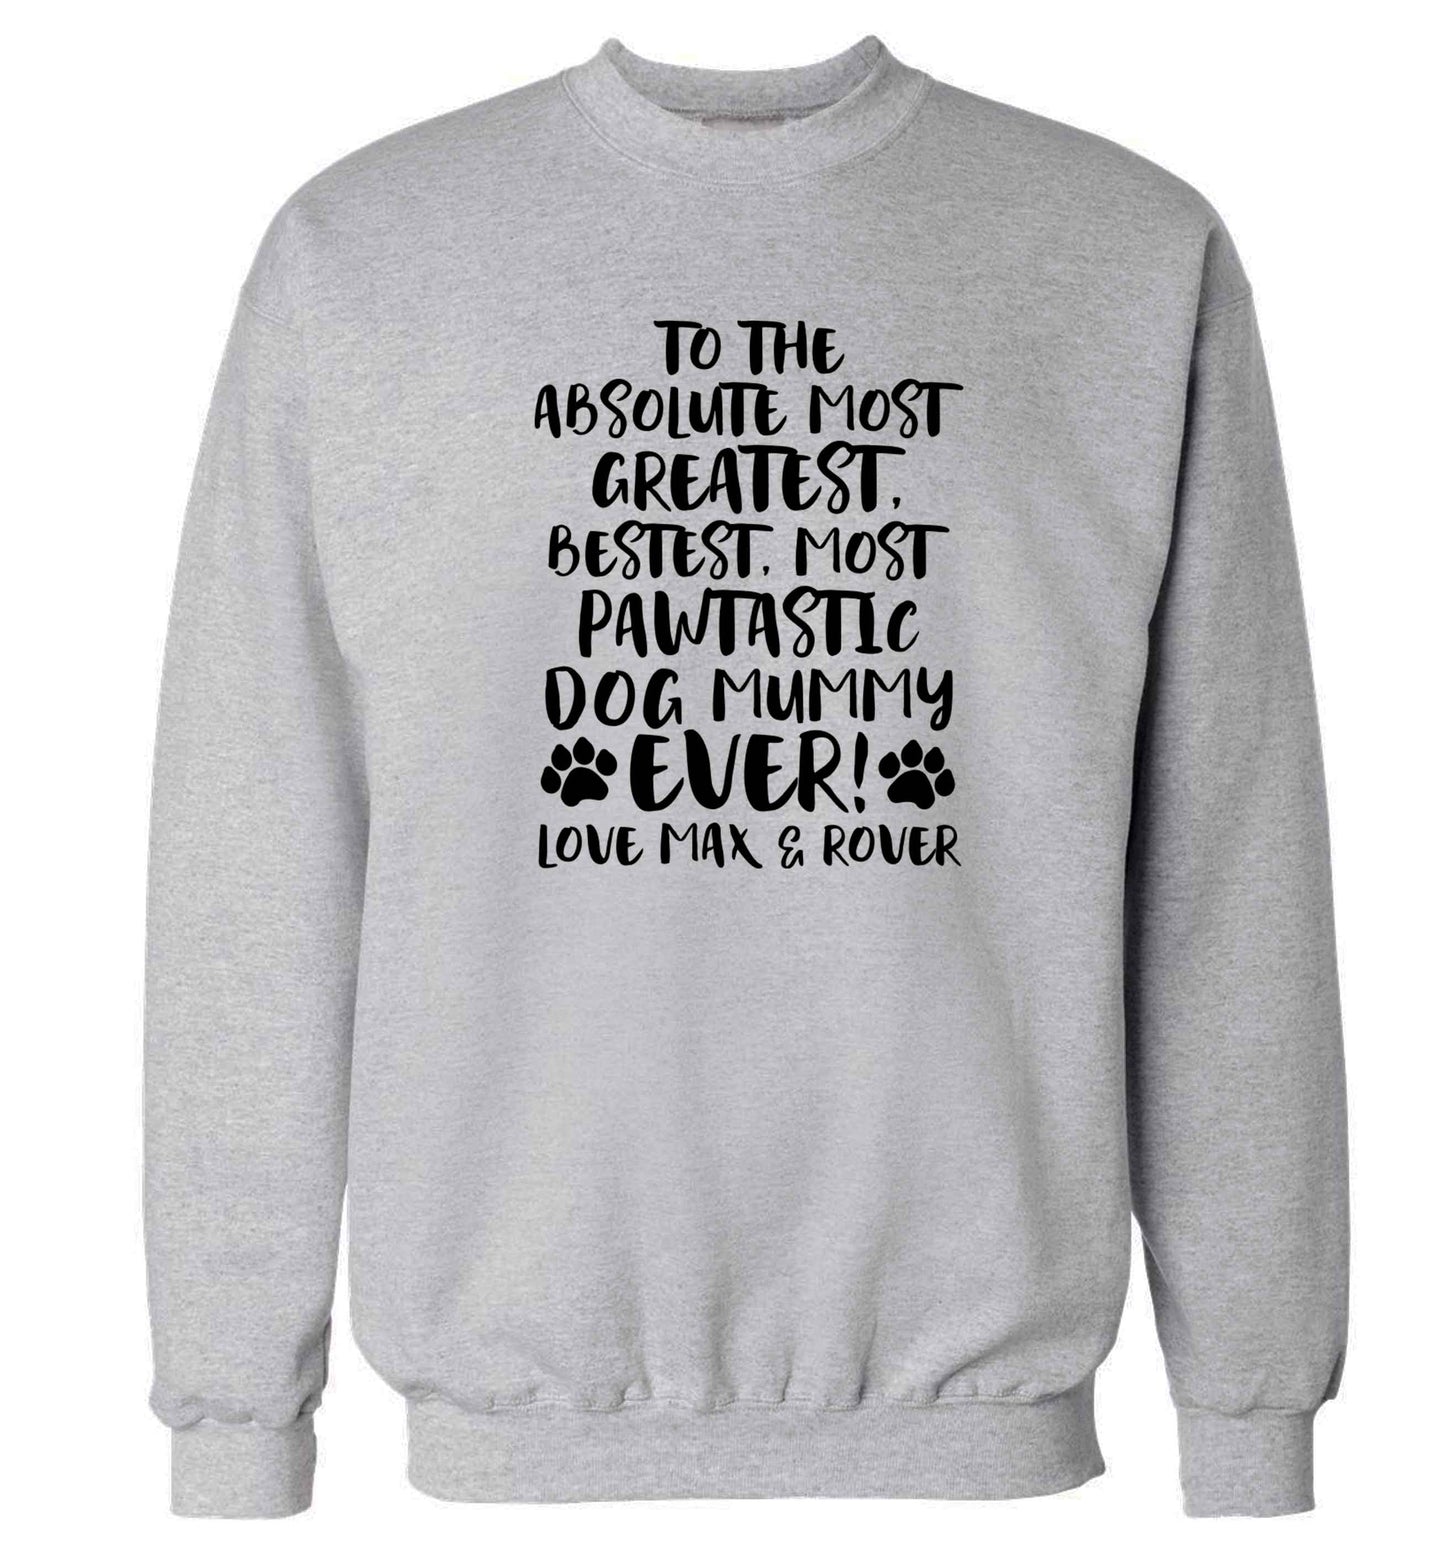 Personalsied to the most pawtastic dog mummy ever Adult's unisex grey Sweater 2XL